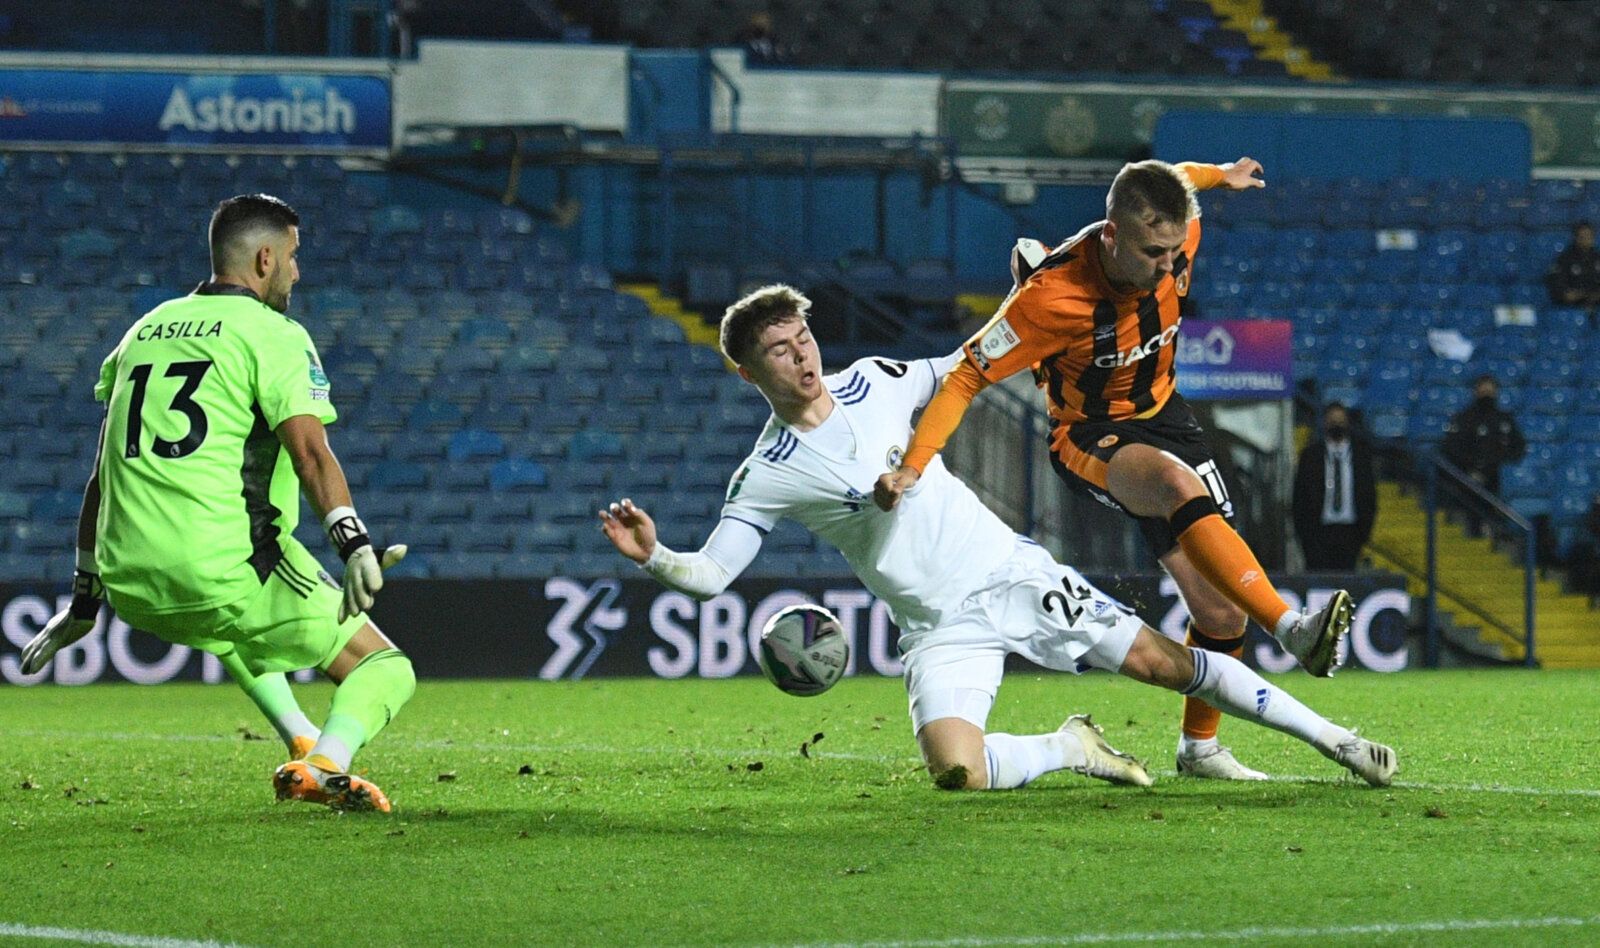 Soccer Football - Carabao Cup Second Round - Leeds United v Hull City - Elland Road, Leeds, Britain - September 16, 2020 Hull City's James Scott misses a chance to score Pool via REUTERS/Oli Scarff EDITORIAL USE ONLY. No use with unauthorized audio, video, data, fixture lists, club/league logos or 'live' services. Online in-match use limited to 75 images, no video emulation. No use in betting, games or single club/league/player publications.  Please contact your account representative for furthe